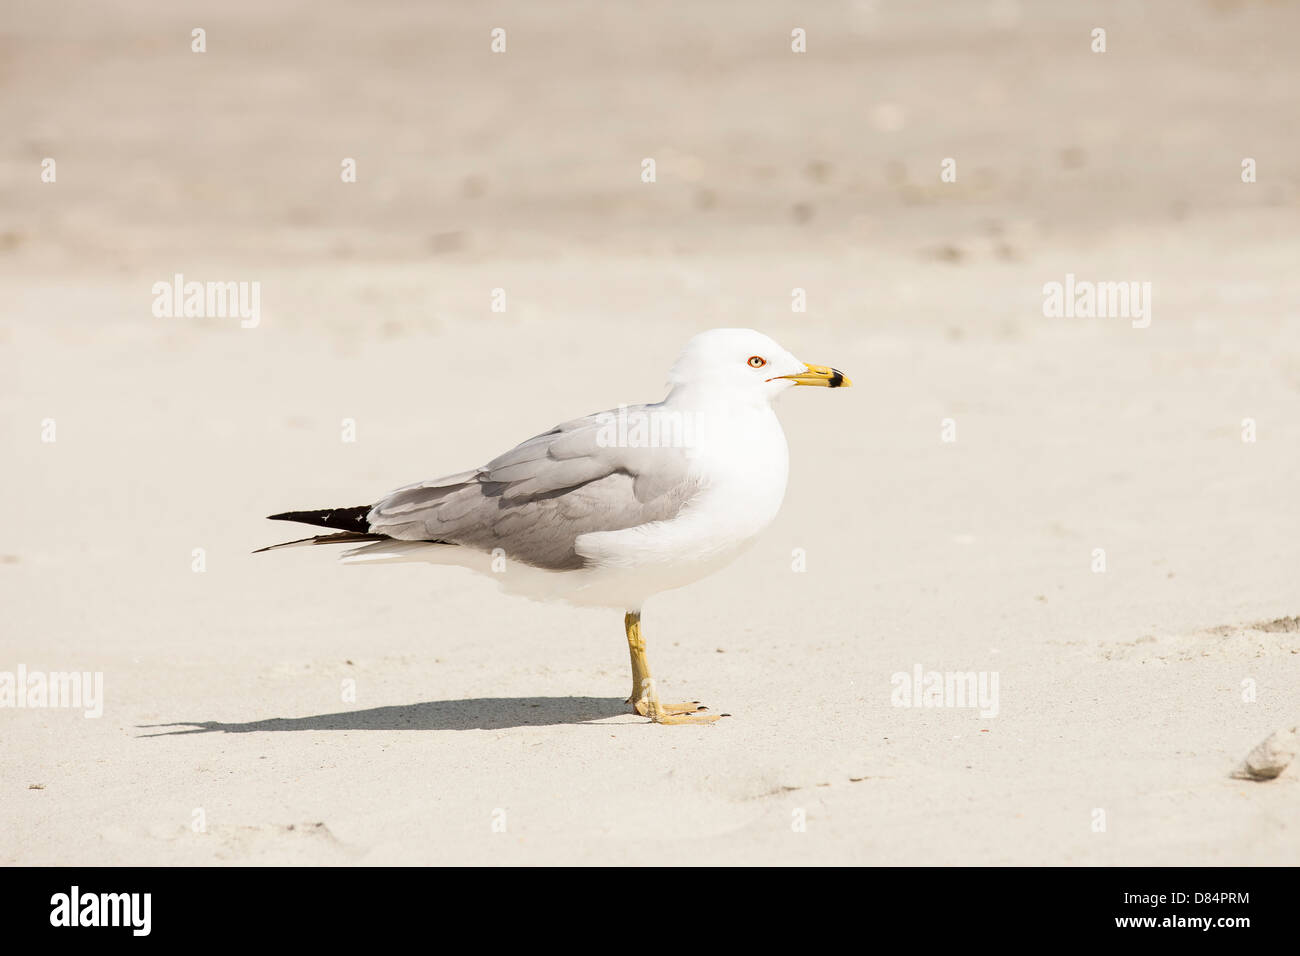 Seagull at beach Banque D'Images